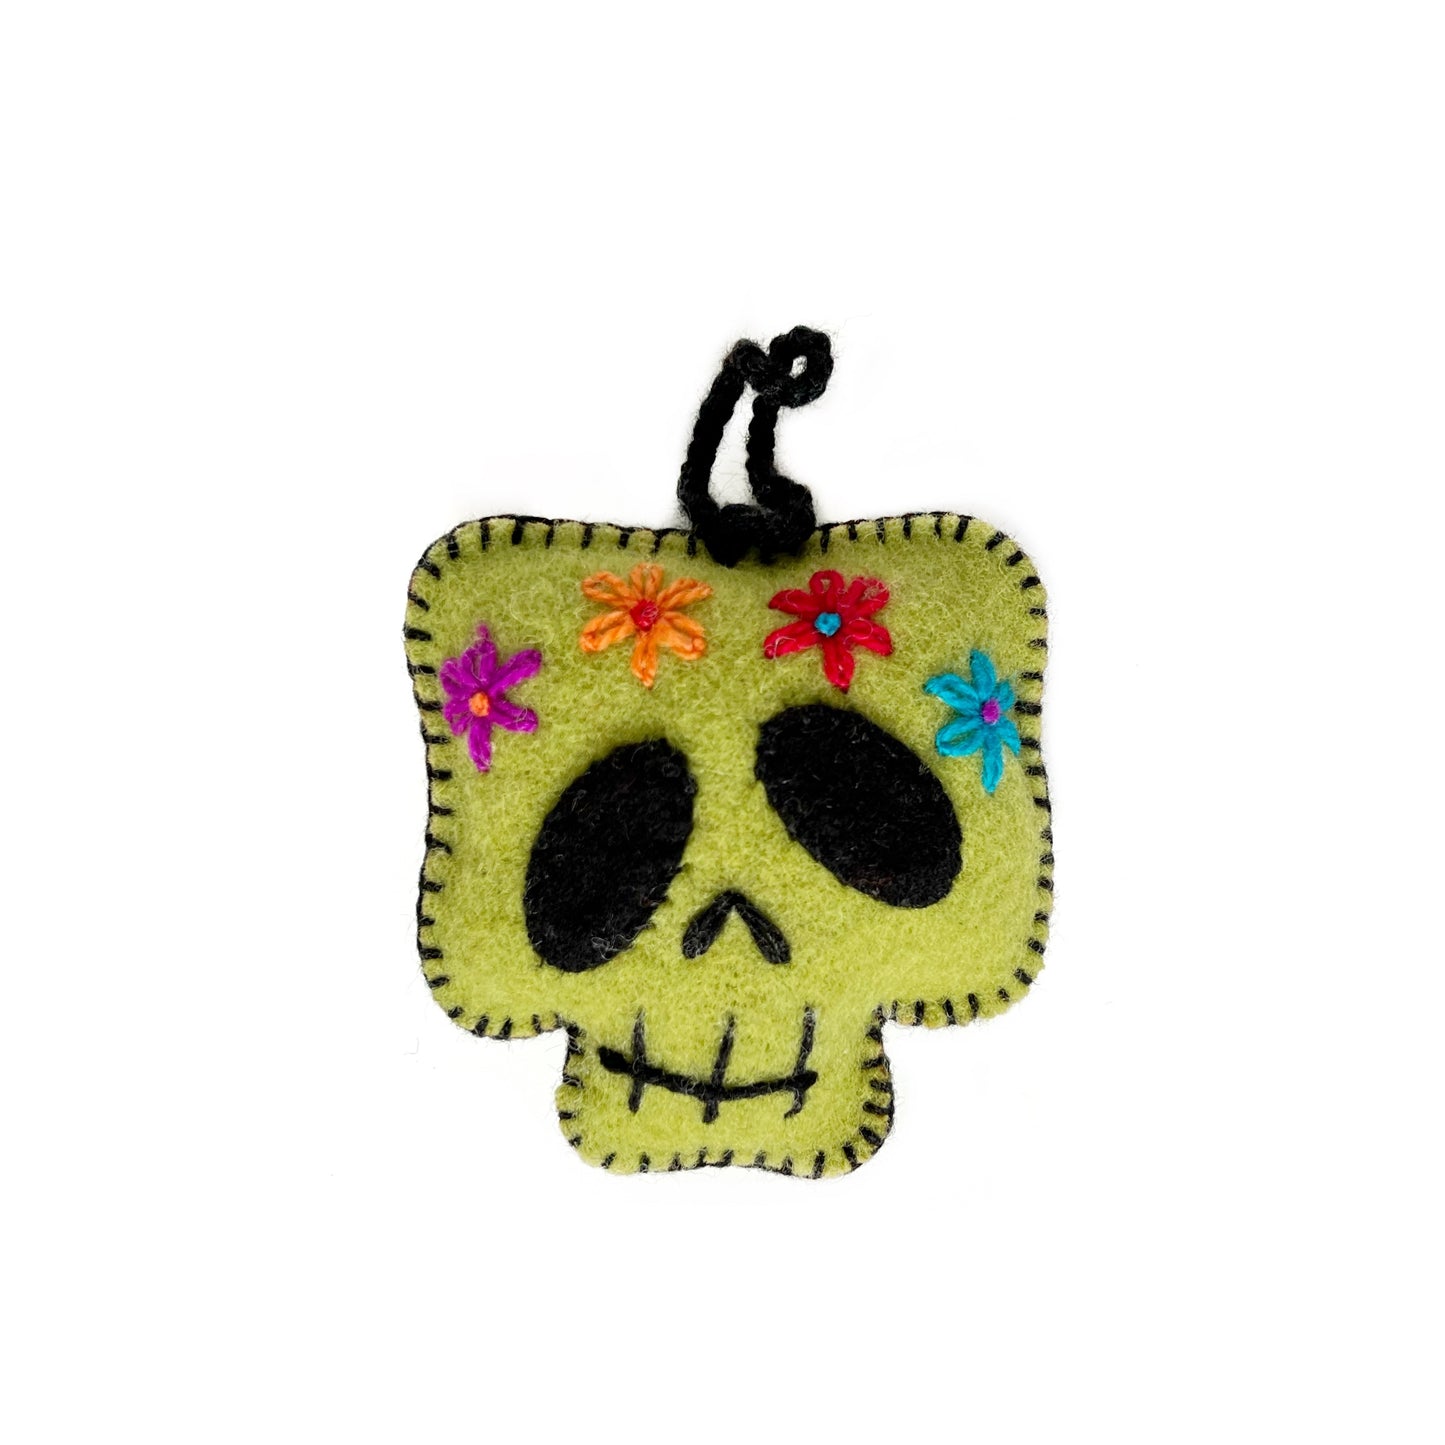 Colorful Halloween Ornament: Cute Monster Face